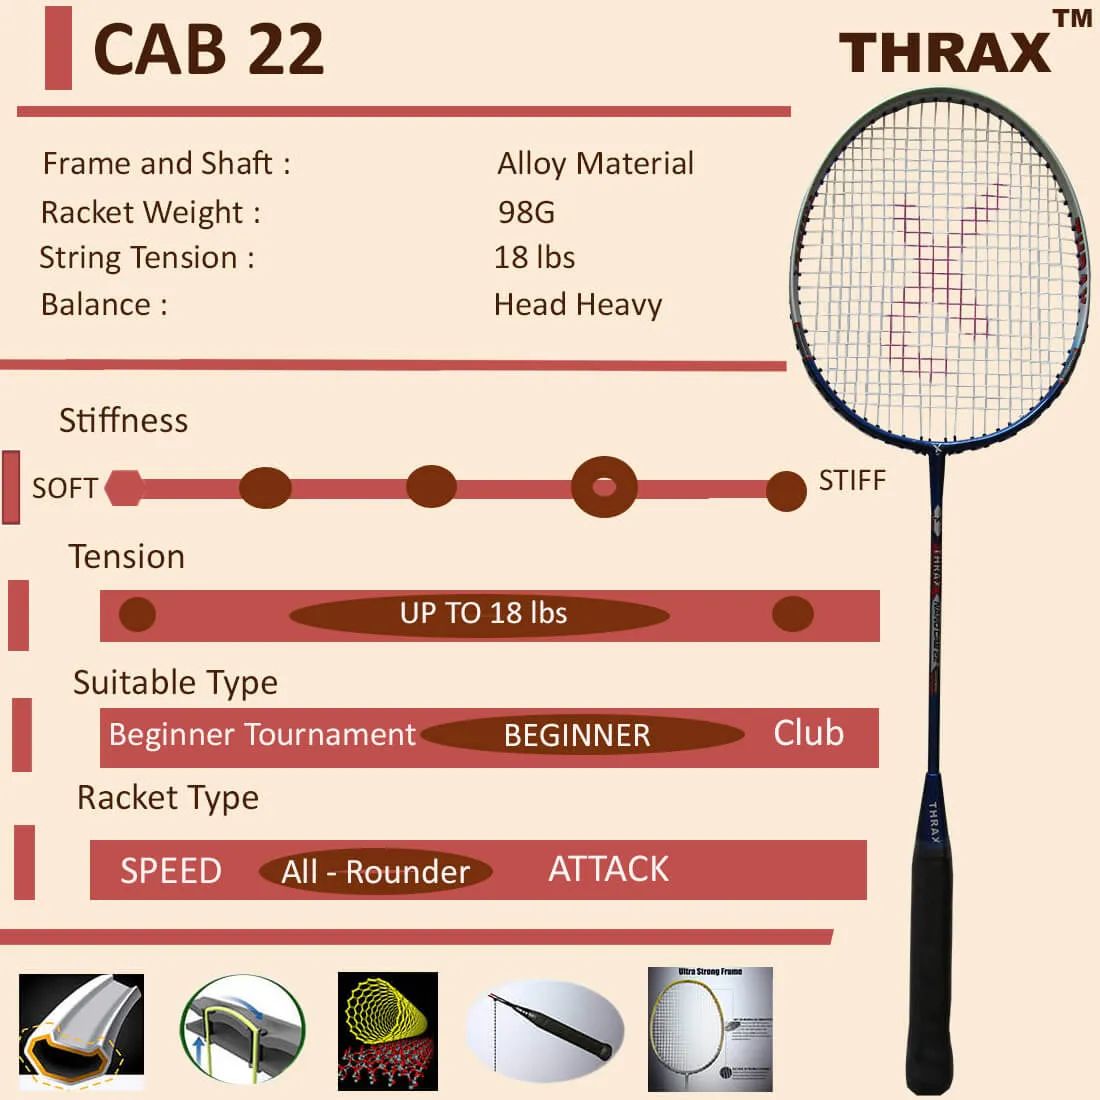 Thrax_CAB_22_Badminton_Racket_Technical_Specification_Blue